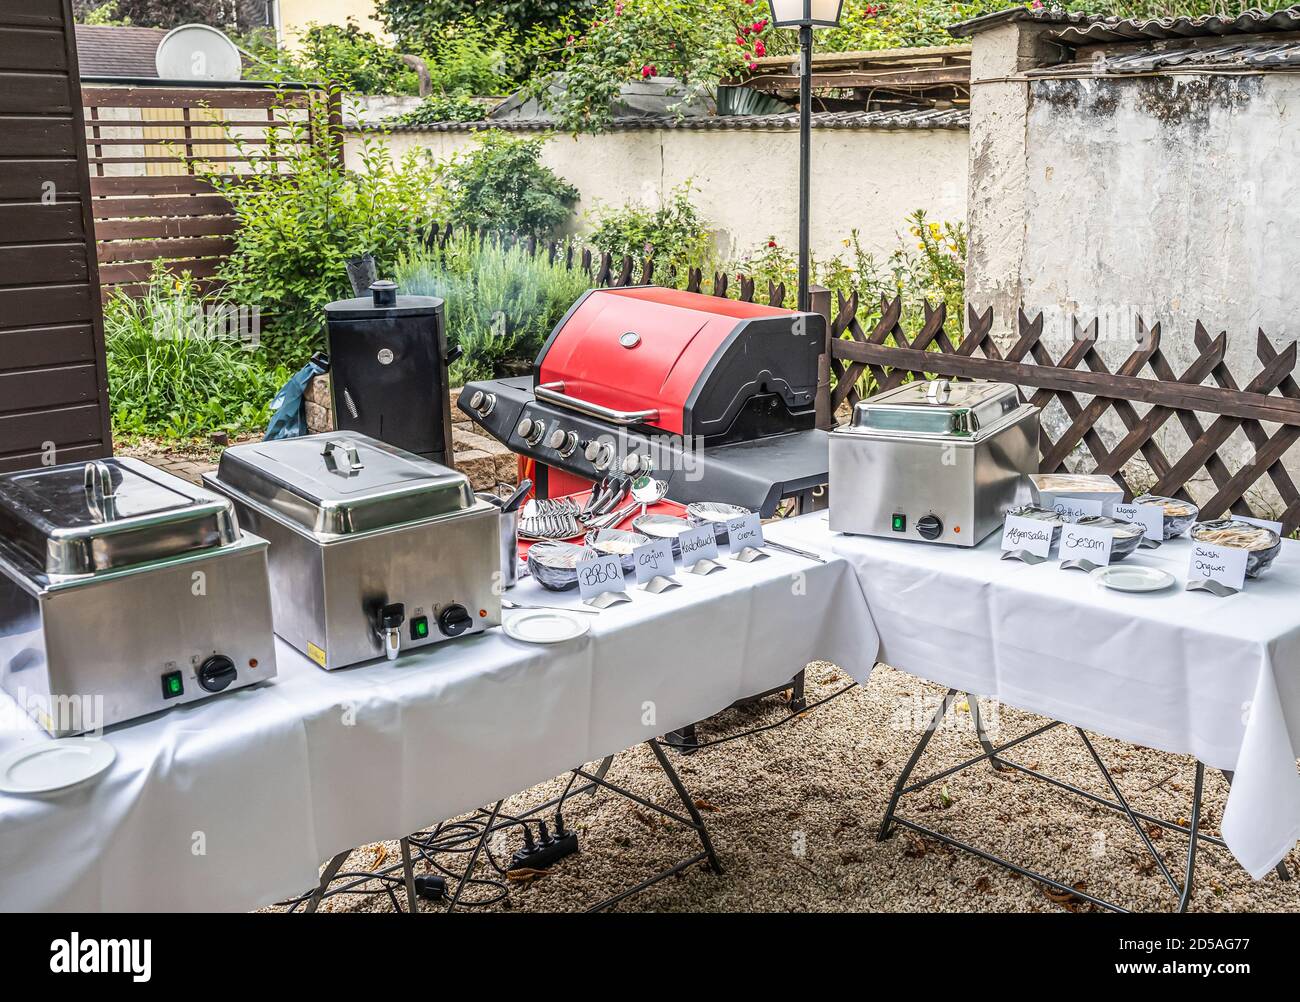 Large barbecue grill and smoker setup with sauces grilling meat bbq Party  food outdoor garden party Stock Photo - Alamy